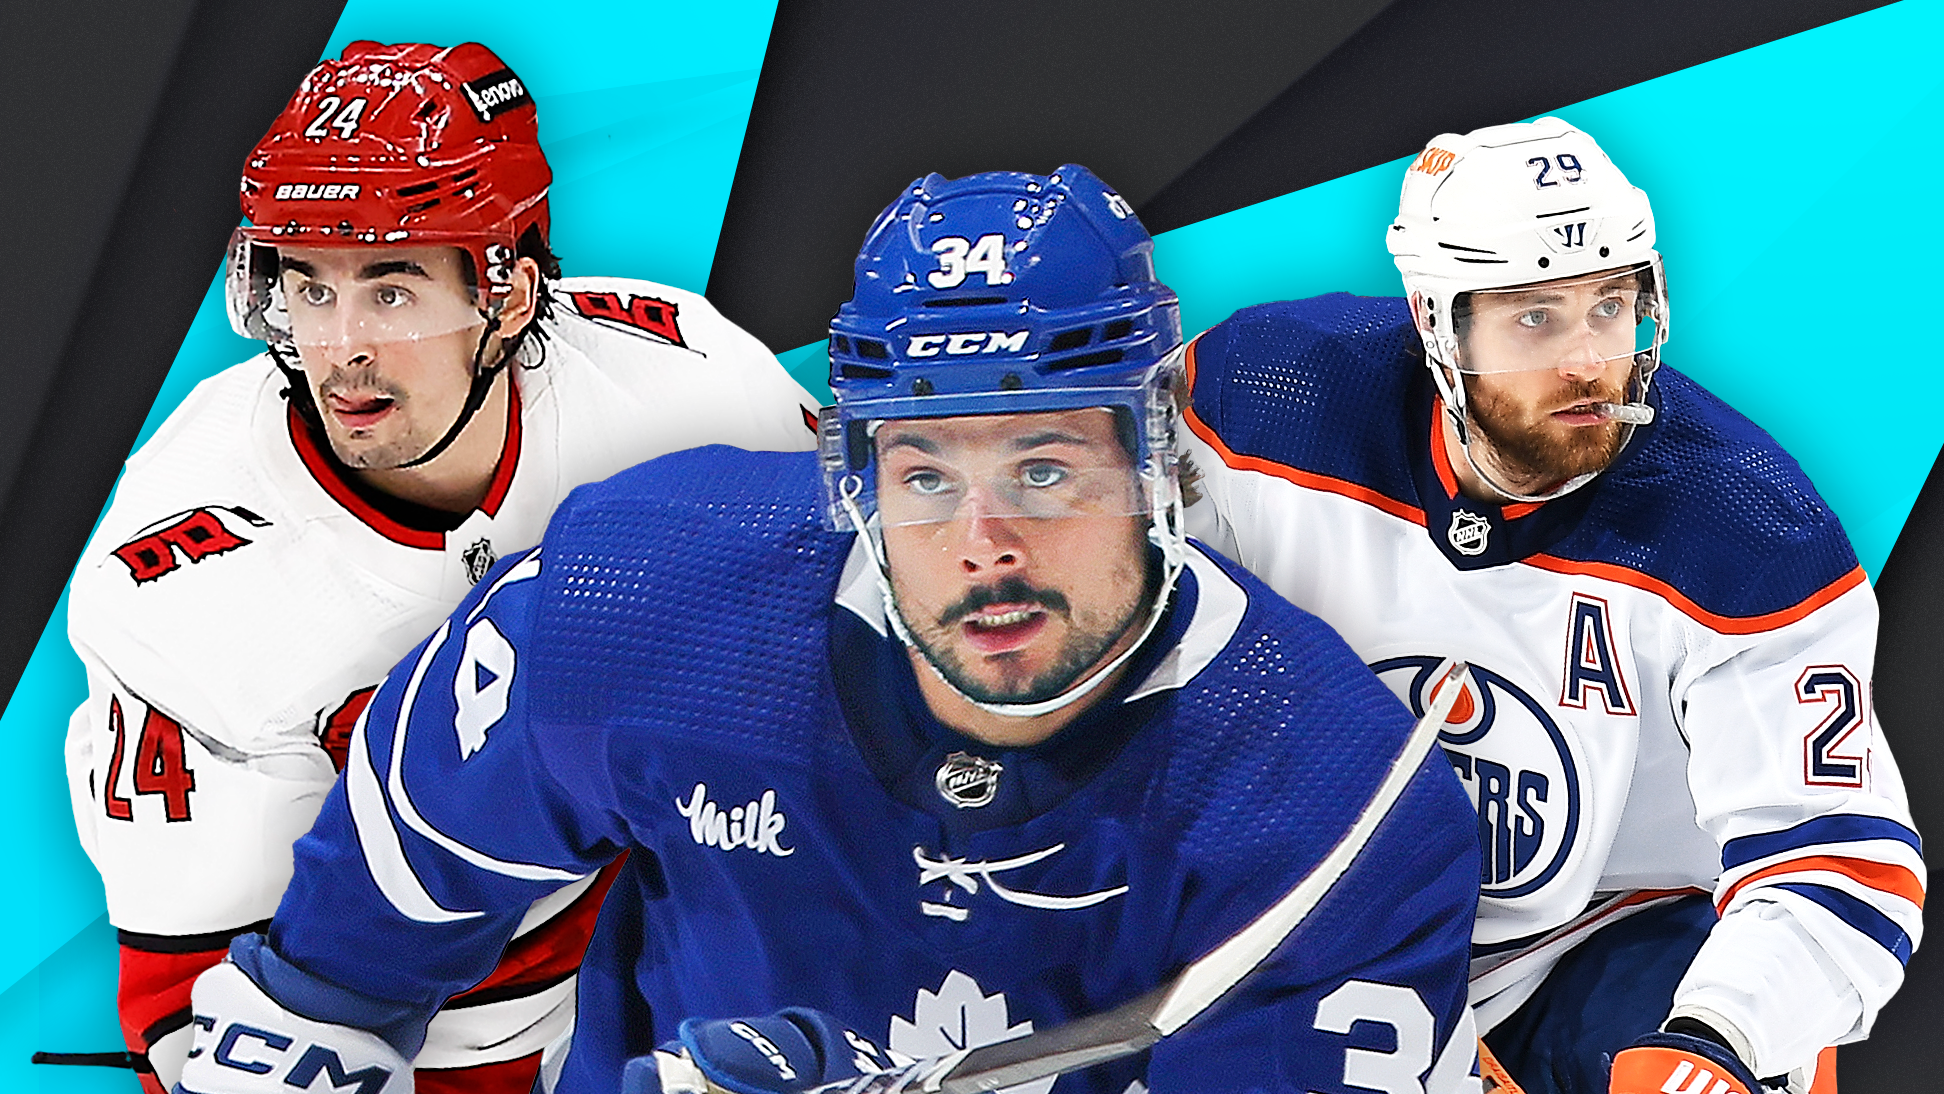 NHL Power Rankings: A new No. 1, plus playoff chances for all 32 teams